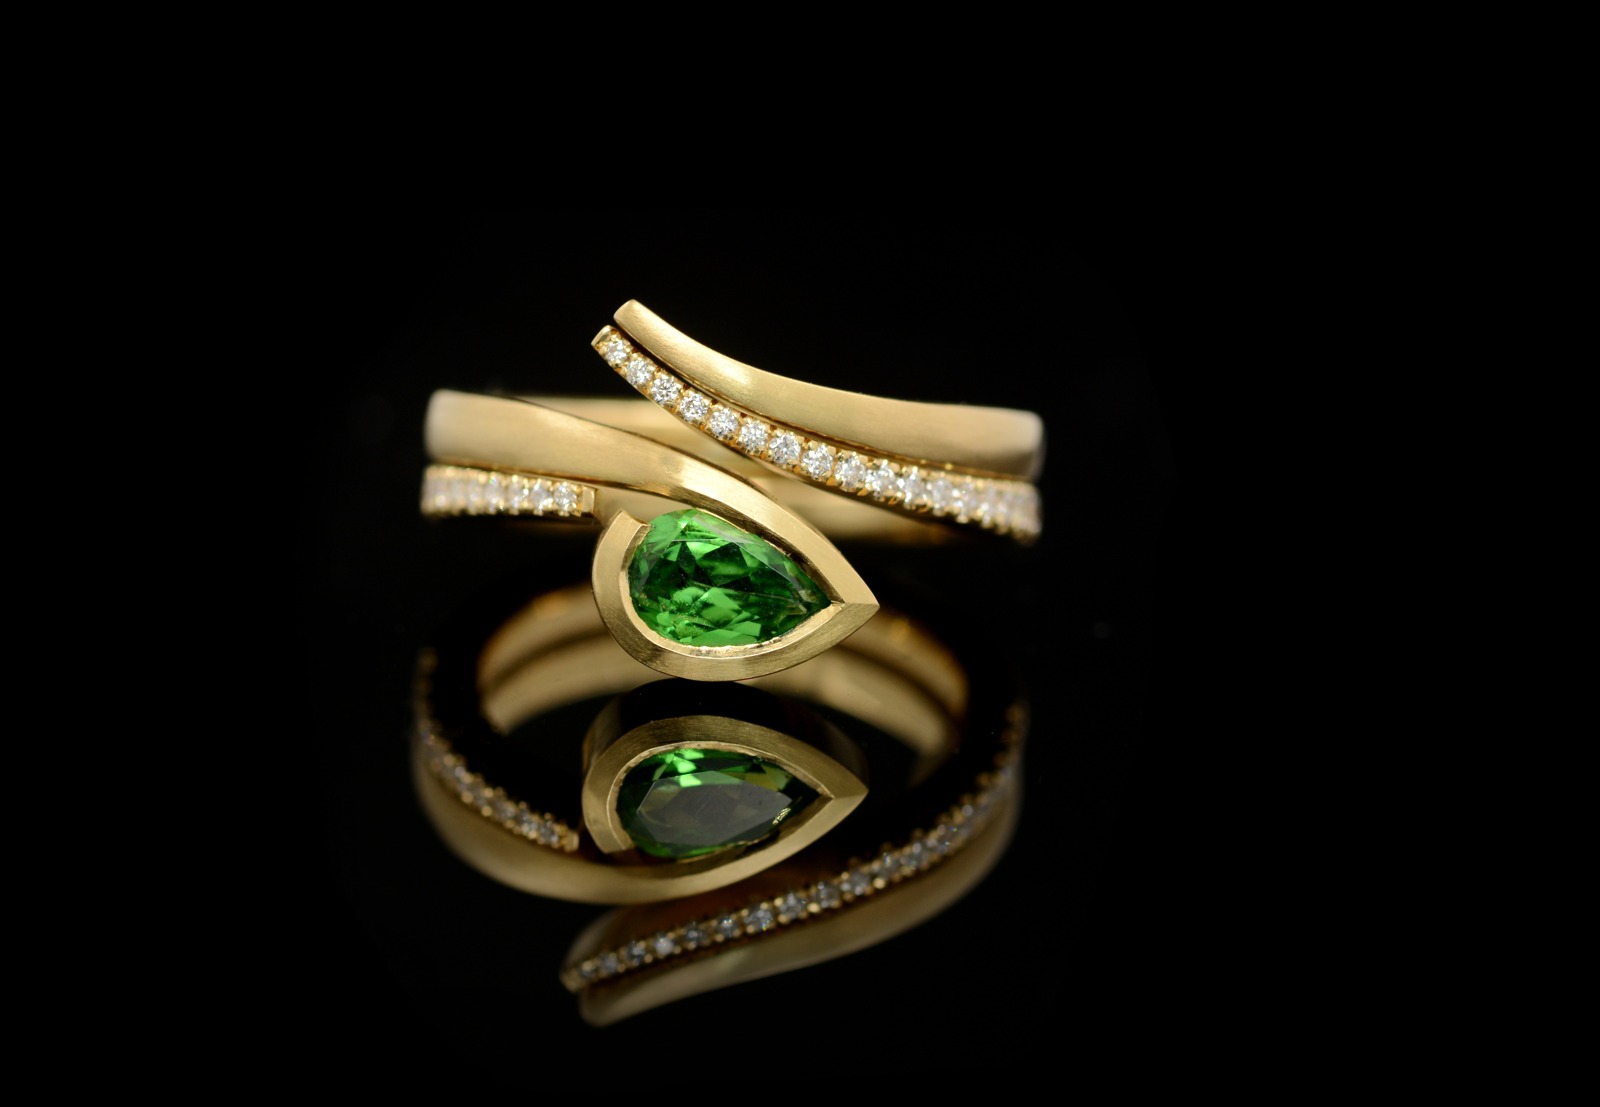 Green garnet twist engagement ring with fitted wedding band